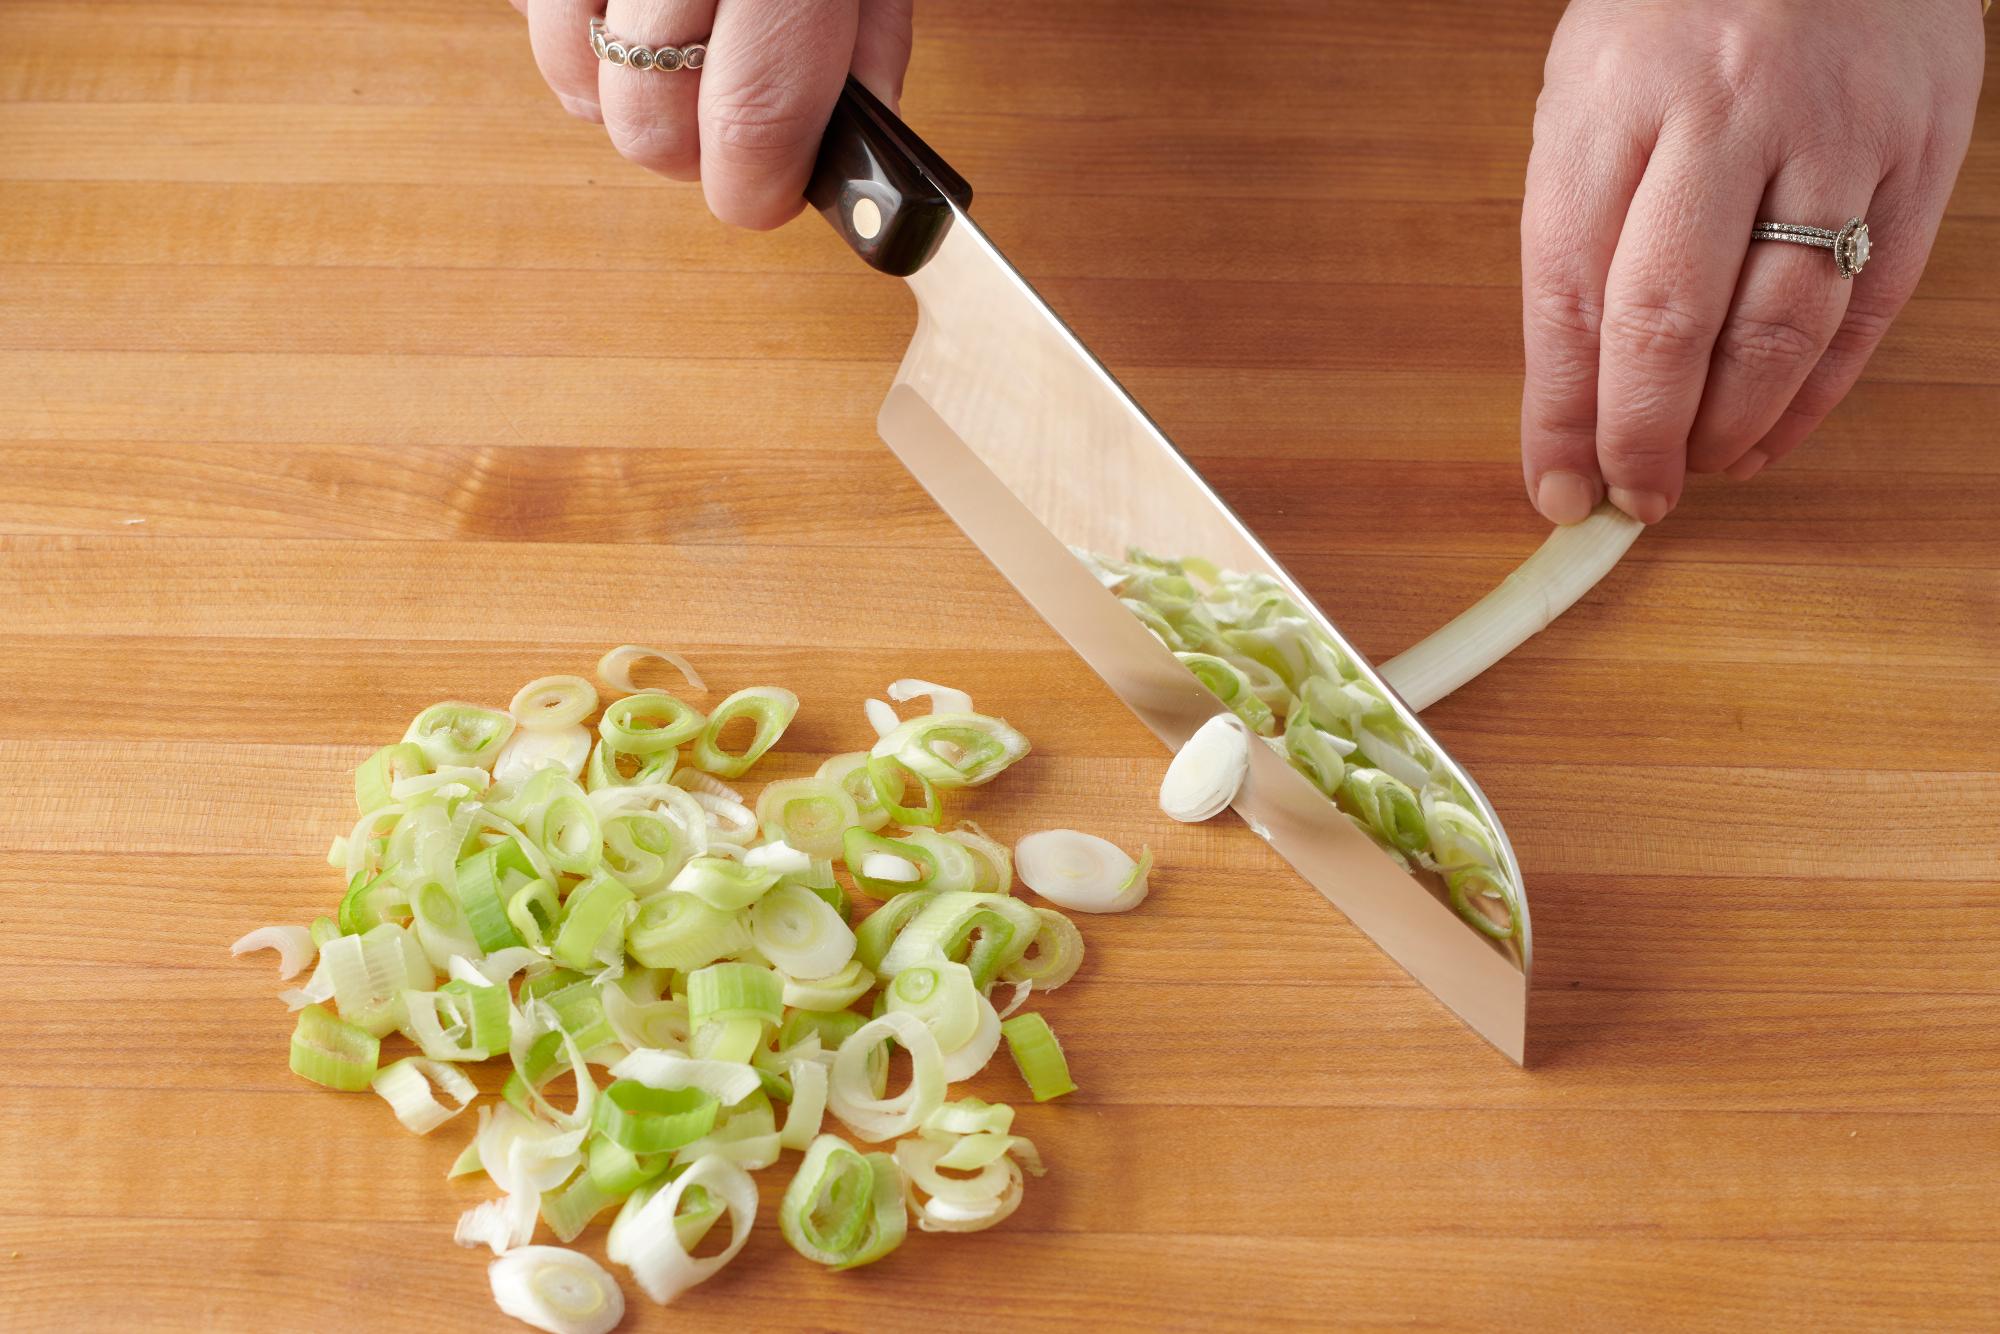 Slicing the green onion with a Santoku.